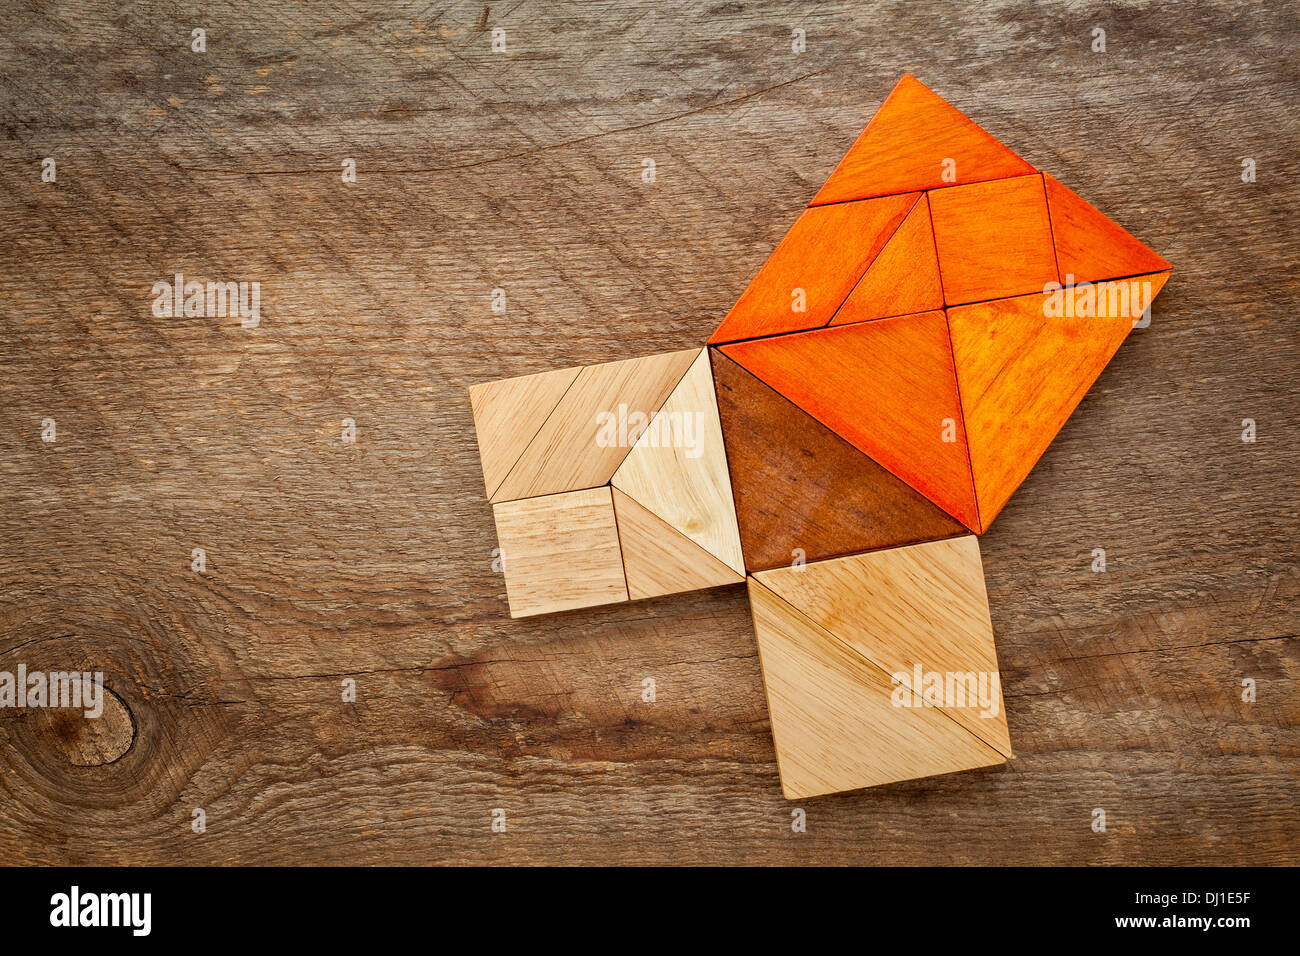 Pythagorean theorem illustrated with wooden pieces of tangram, a classic Chinese puzzle, against barn wood background Stock Photo